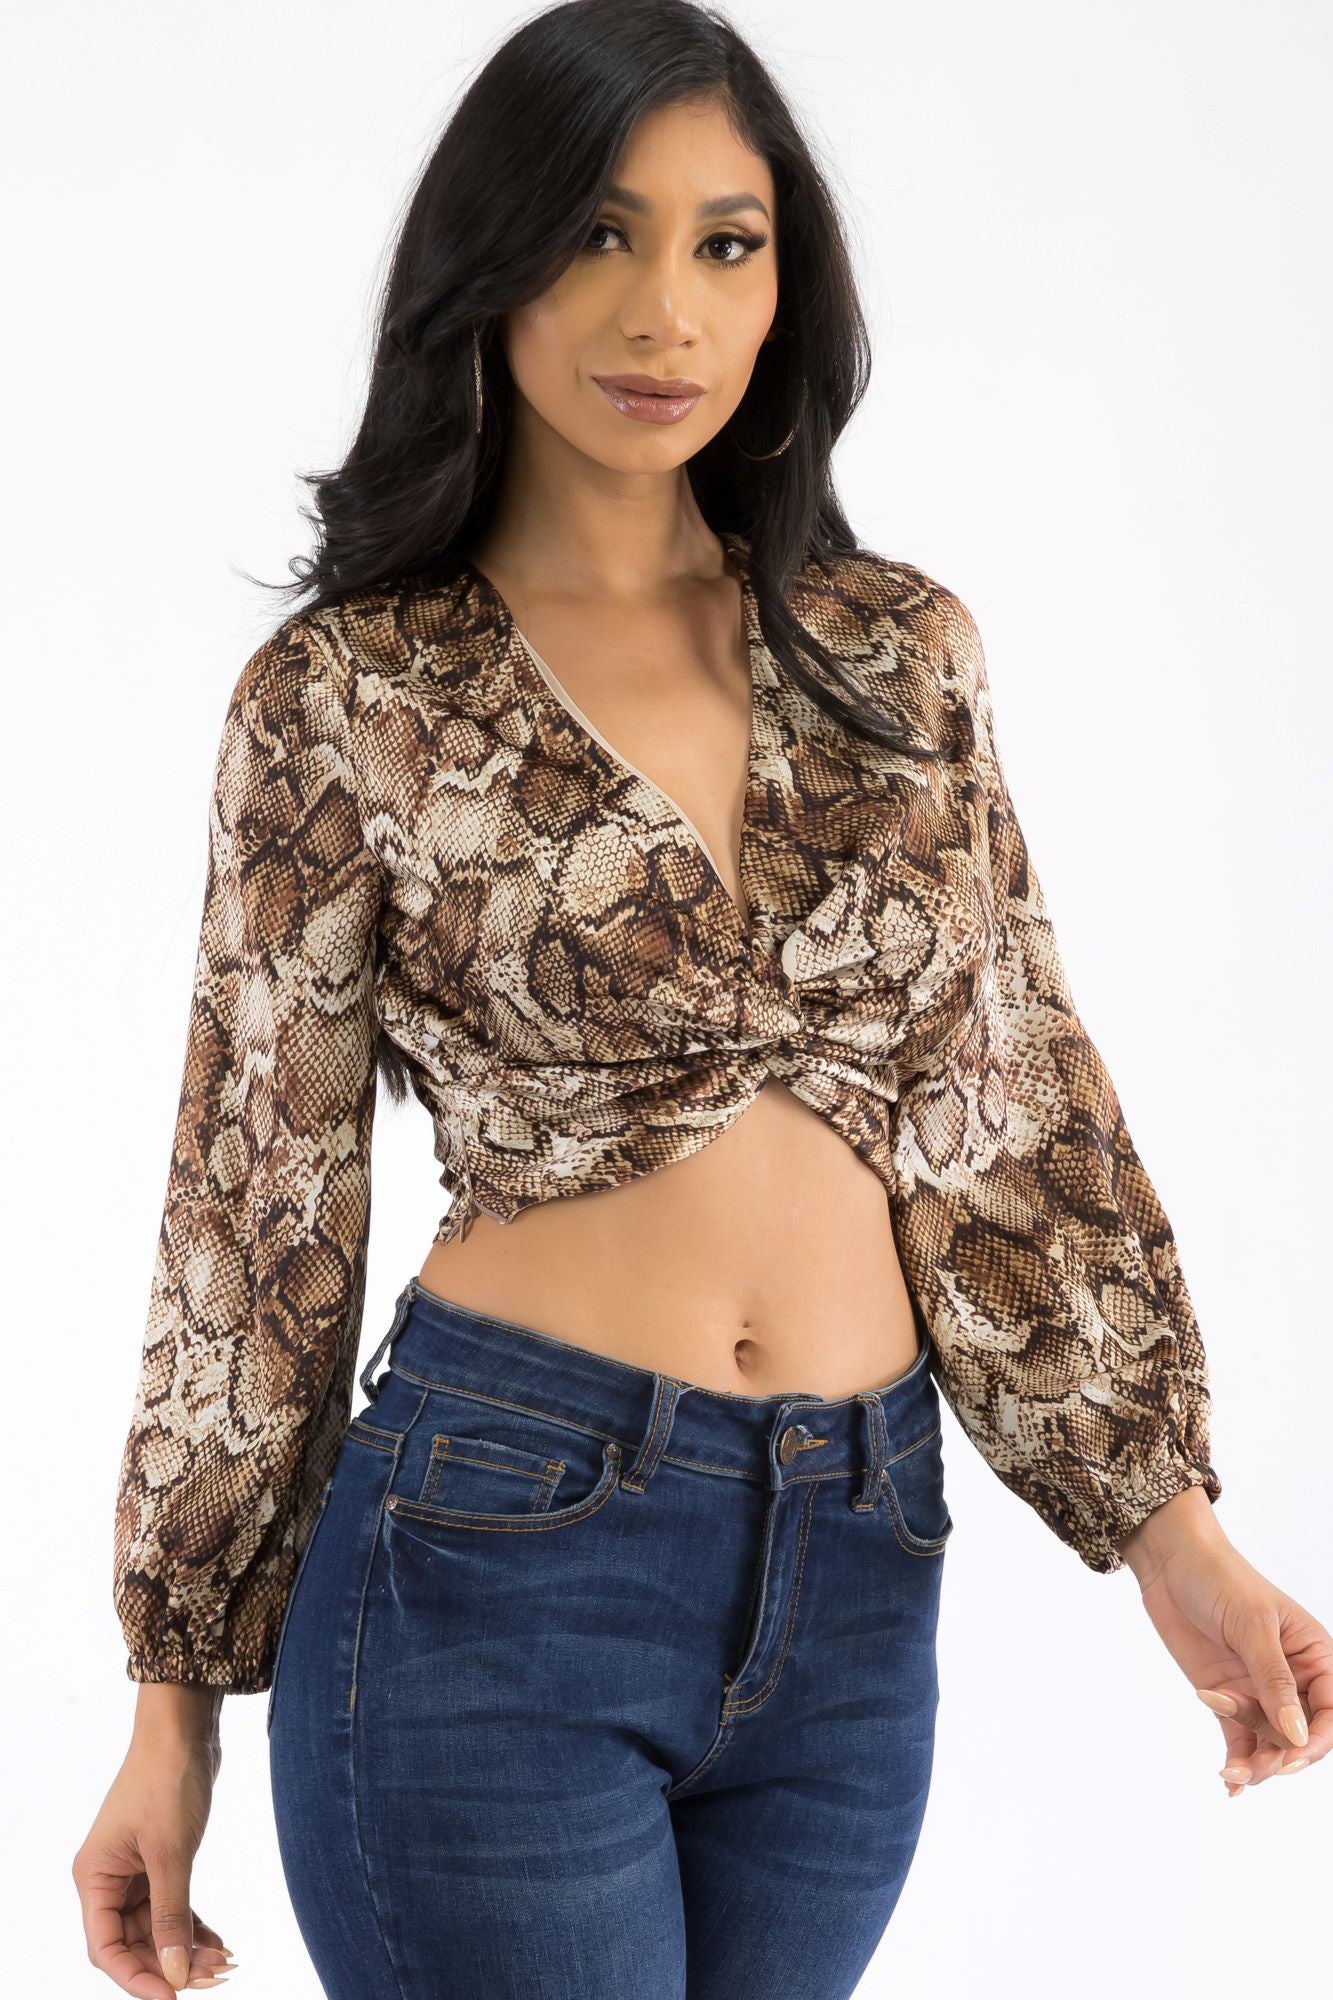 LST0006 - SATIN SNAKE PRINT LONG SLEEVE TWISTED FRONT